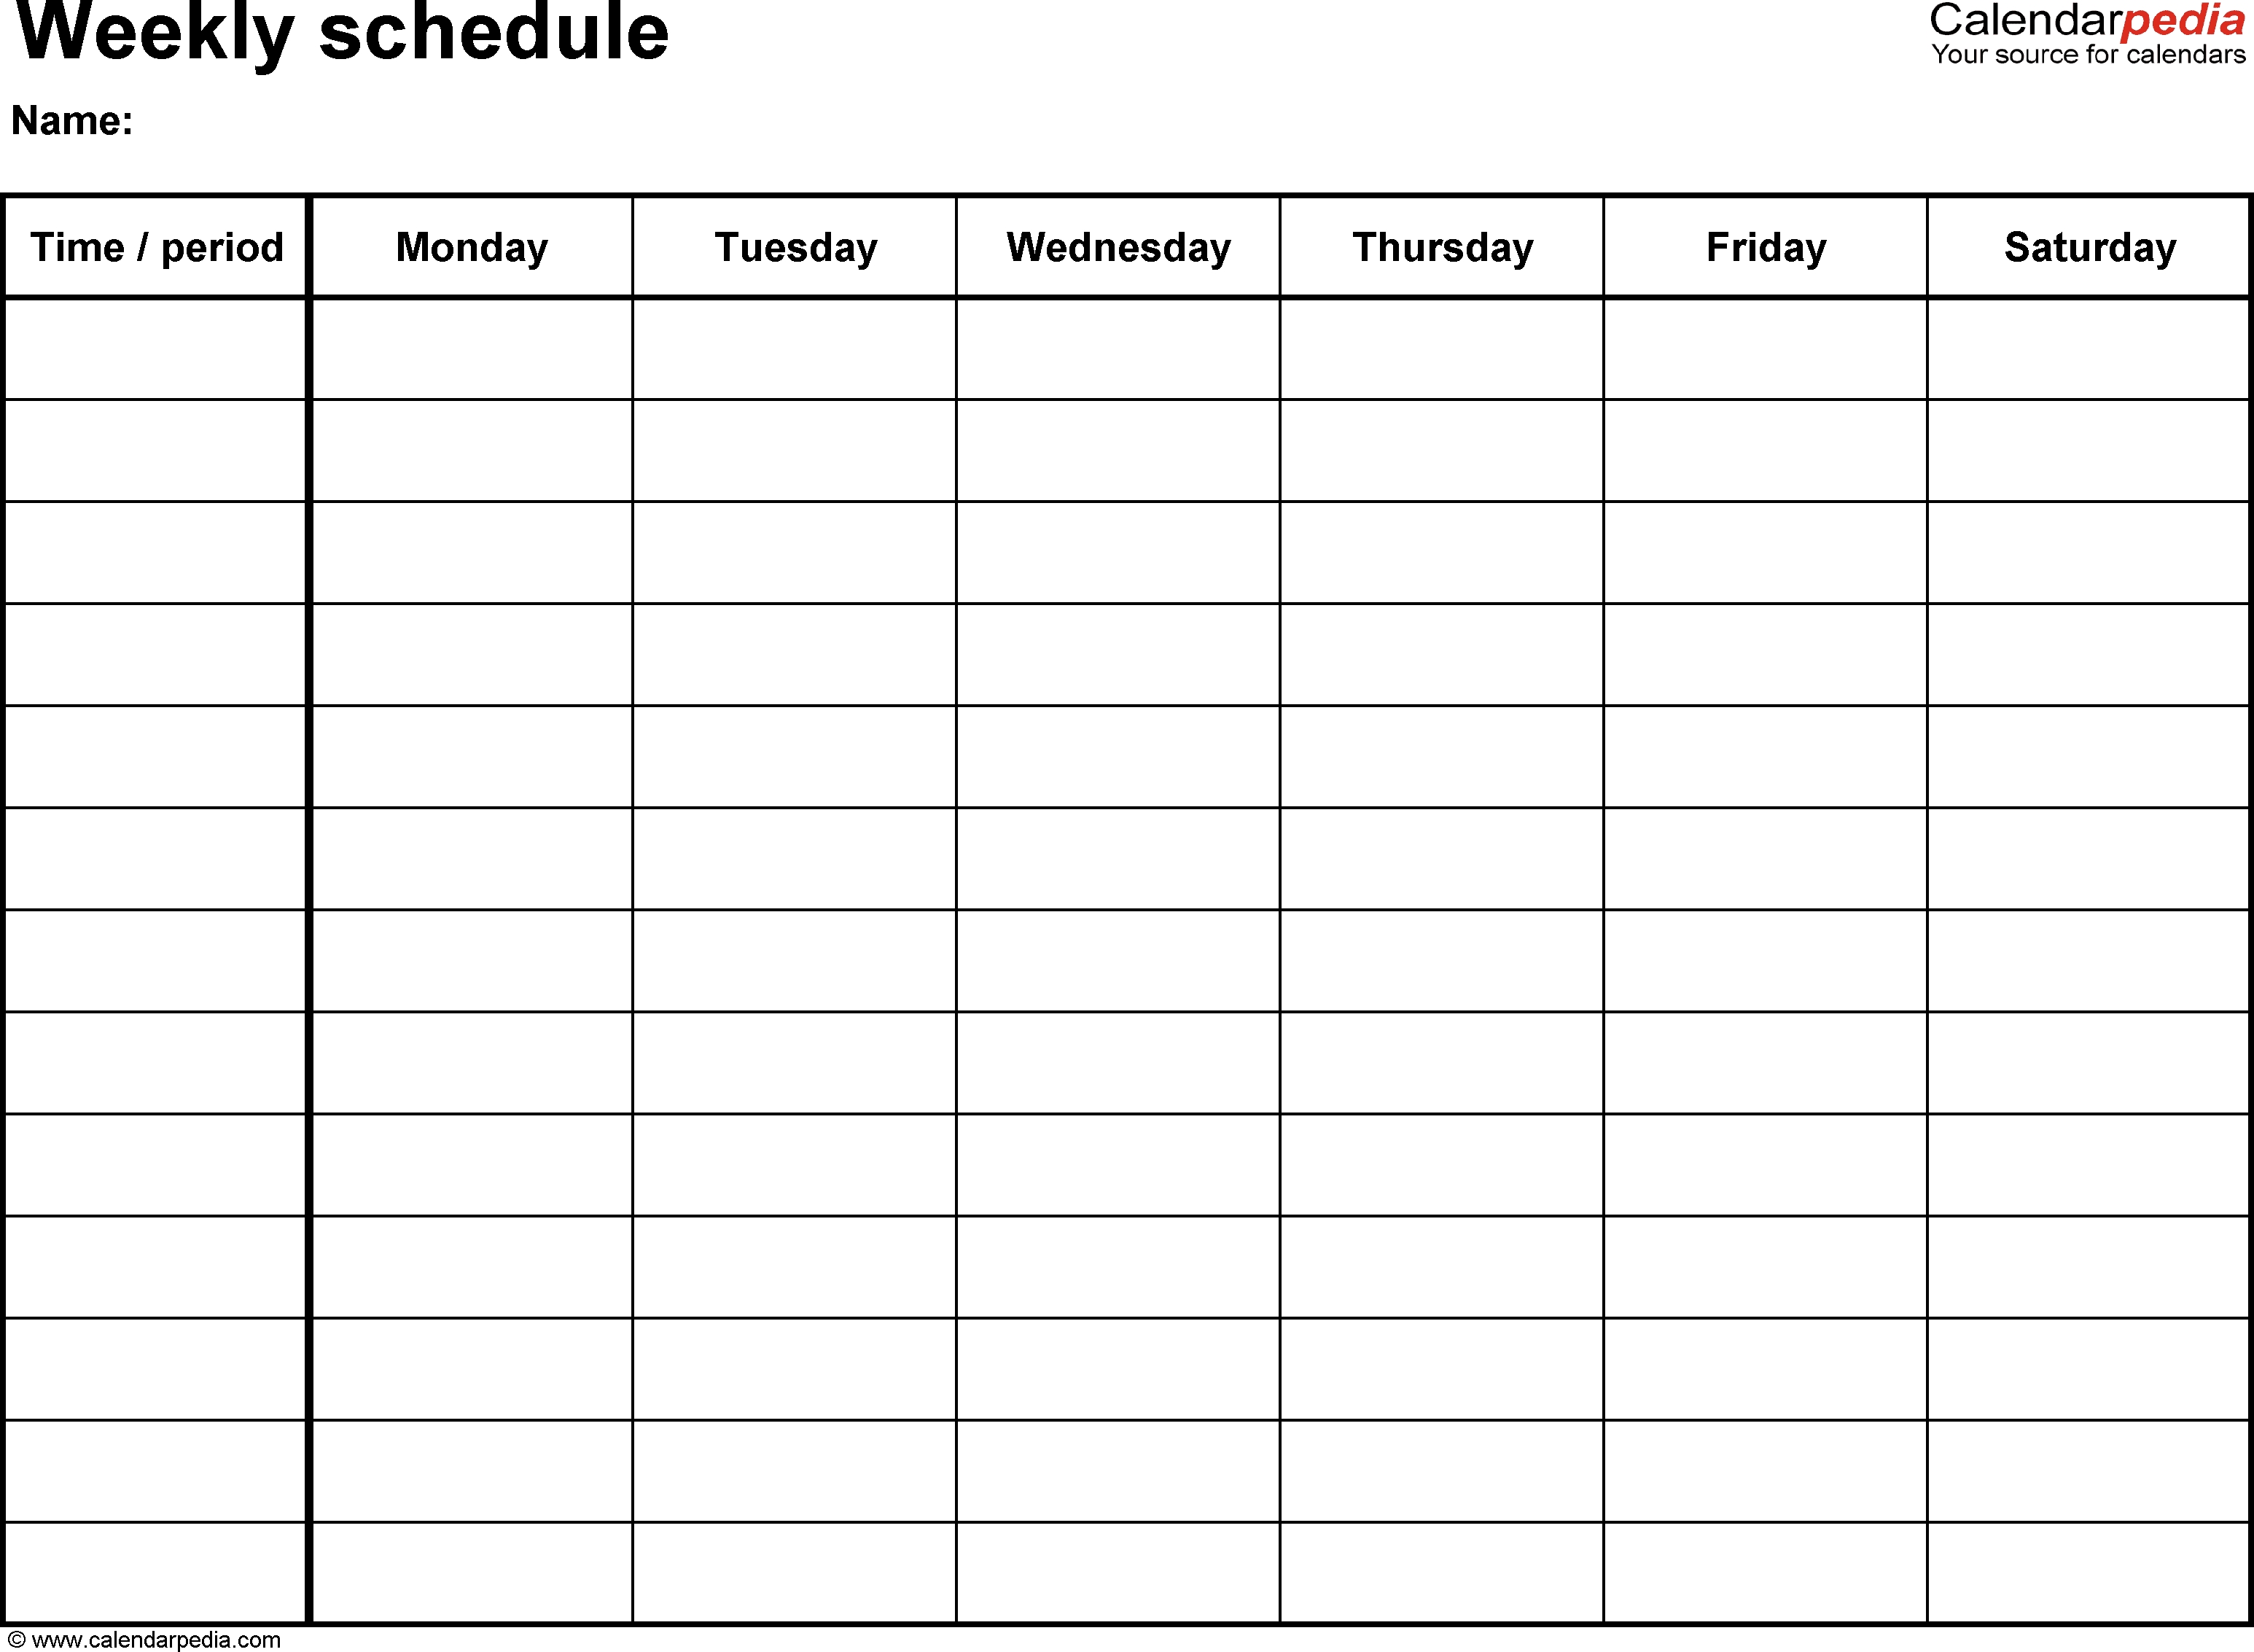 Free Weekly Schedule Templates For Pdf - 18 Templates-Monthly Calandar Template Start From Sunday